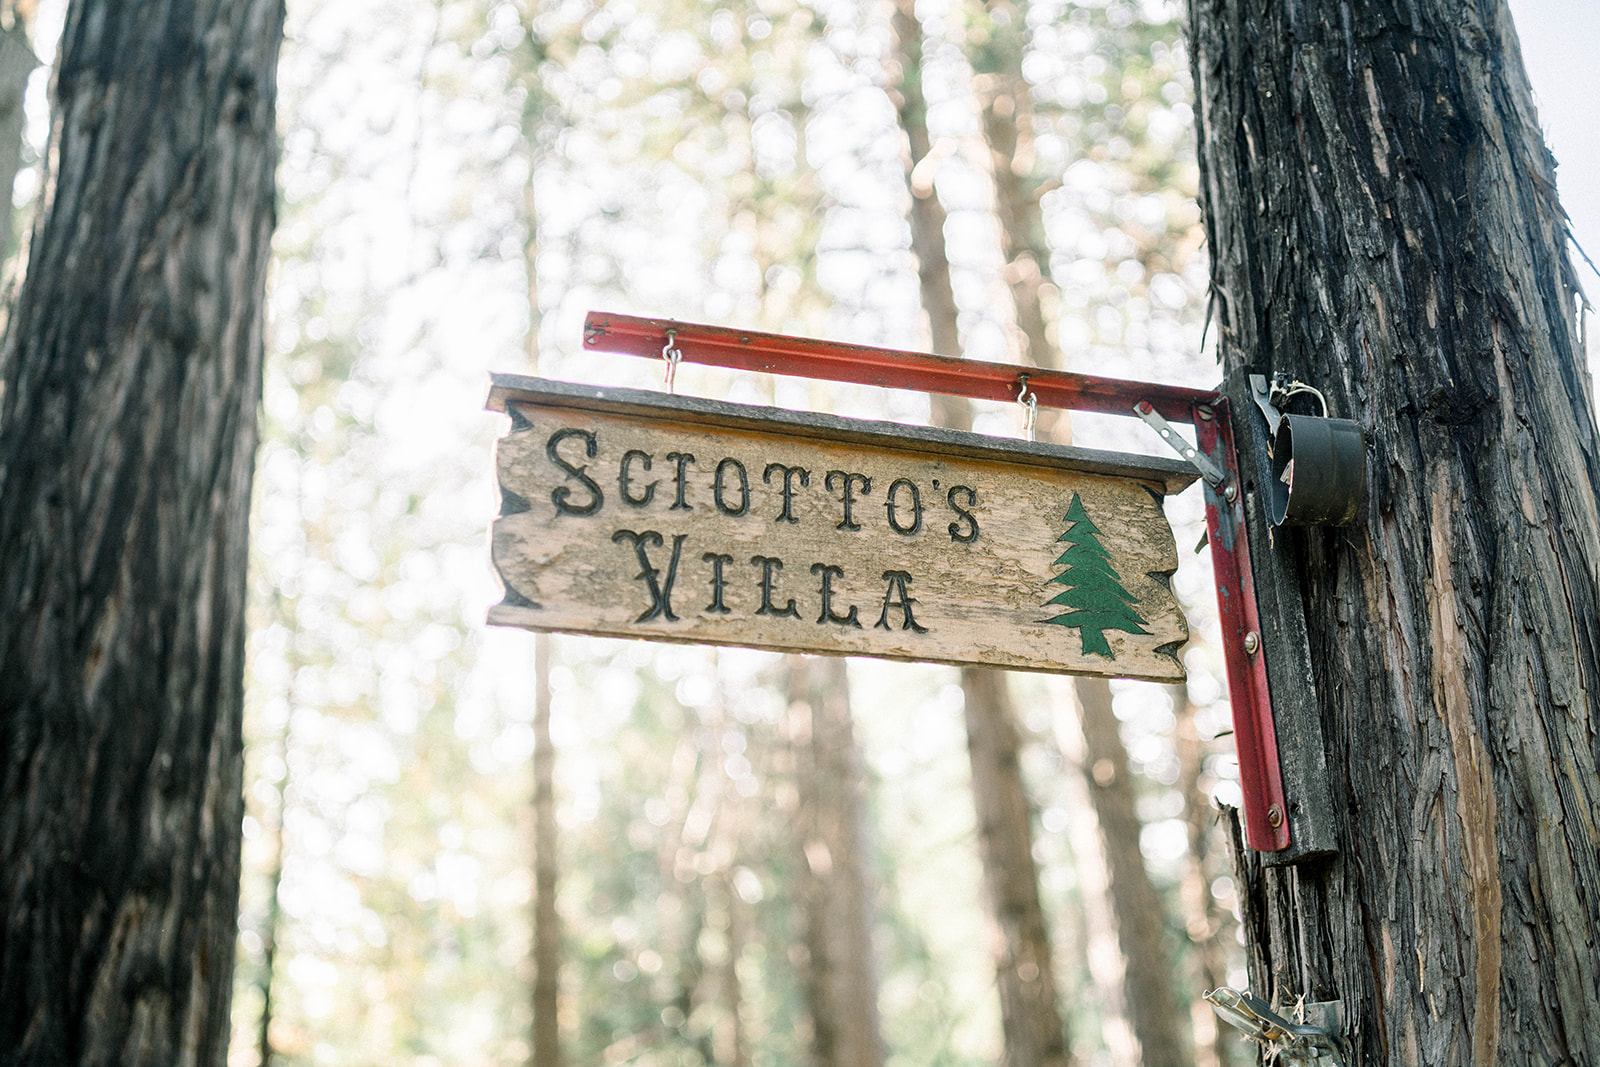 Intimate Rustic and Romantic Outdoor Wedding | Mountainside Bride